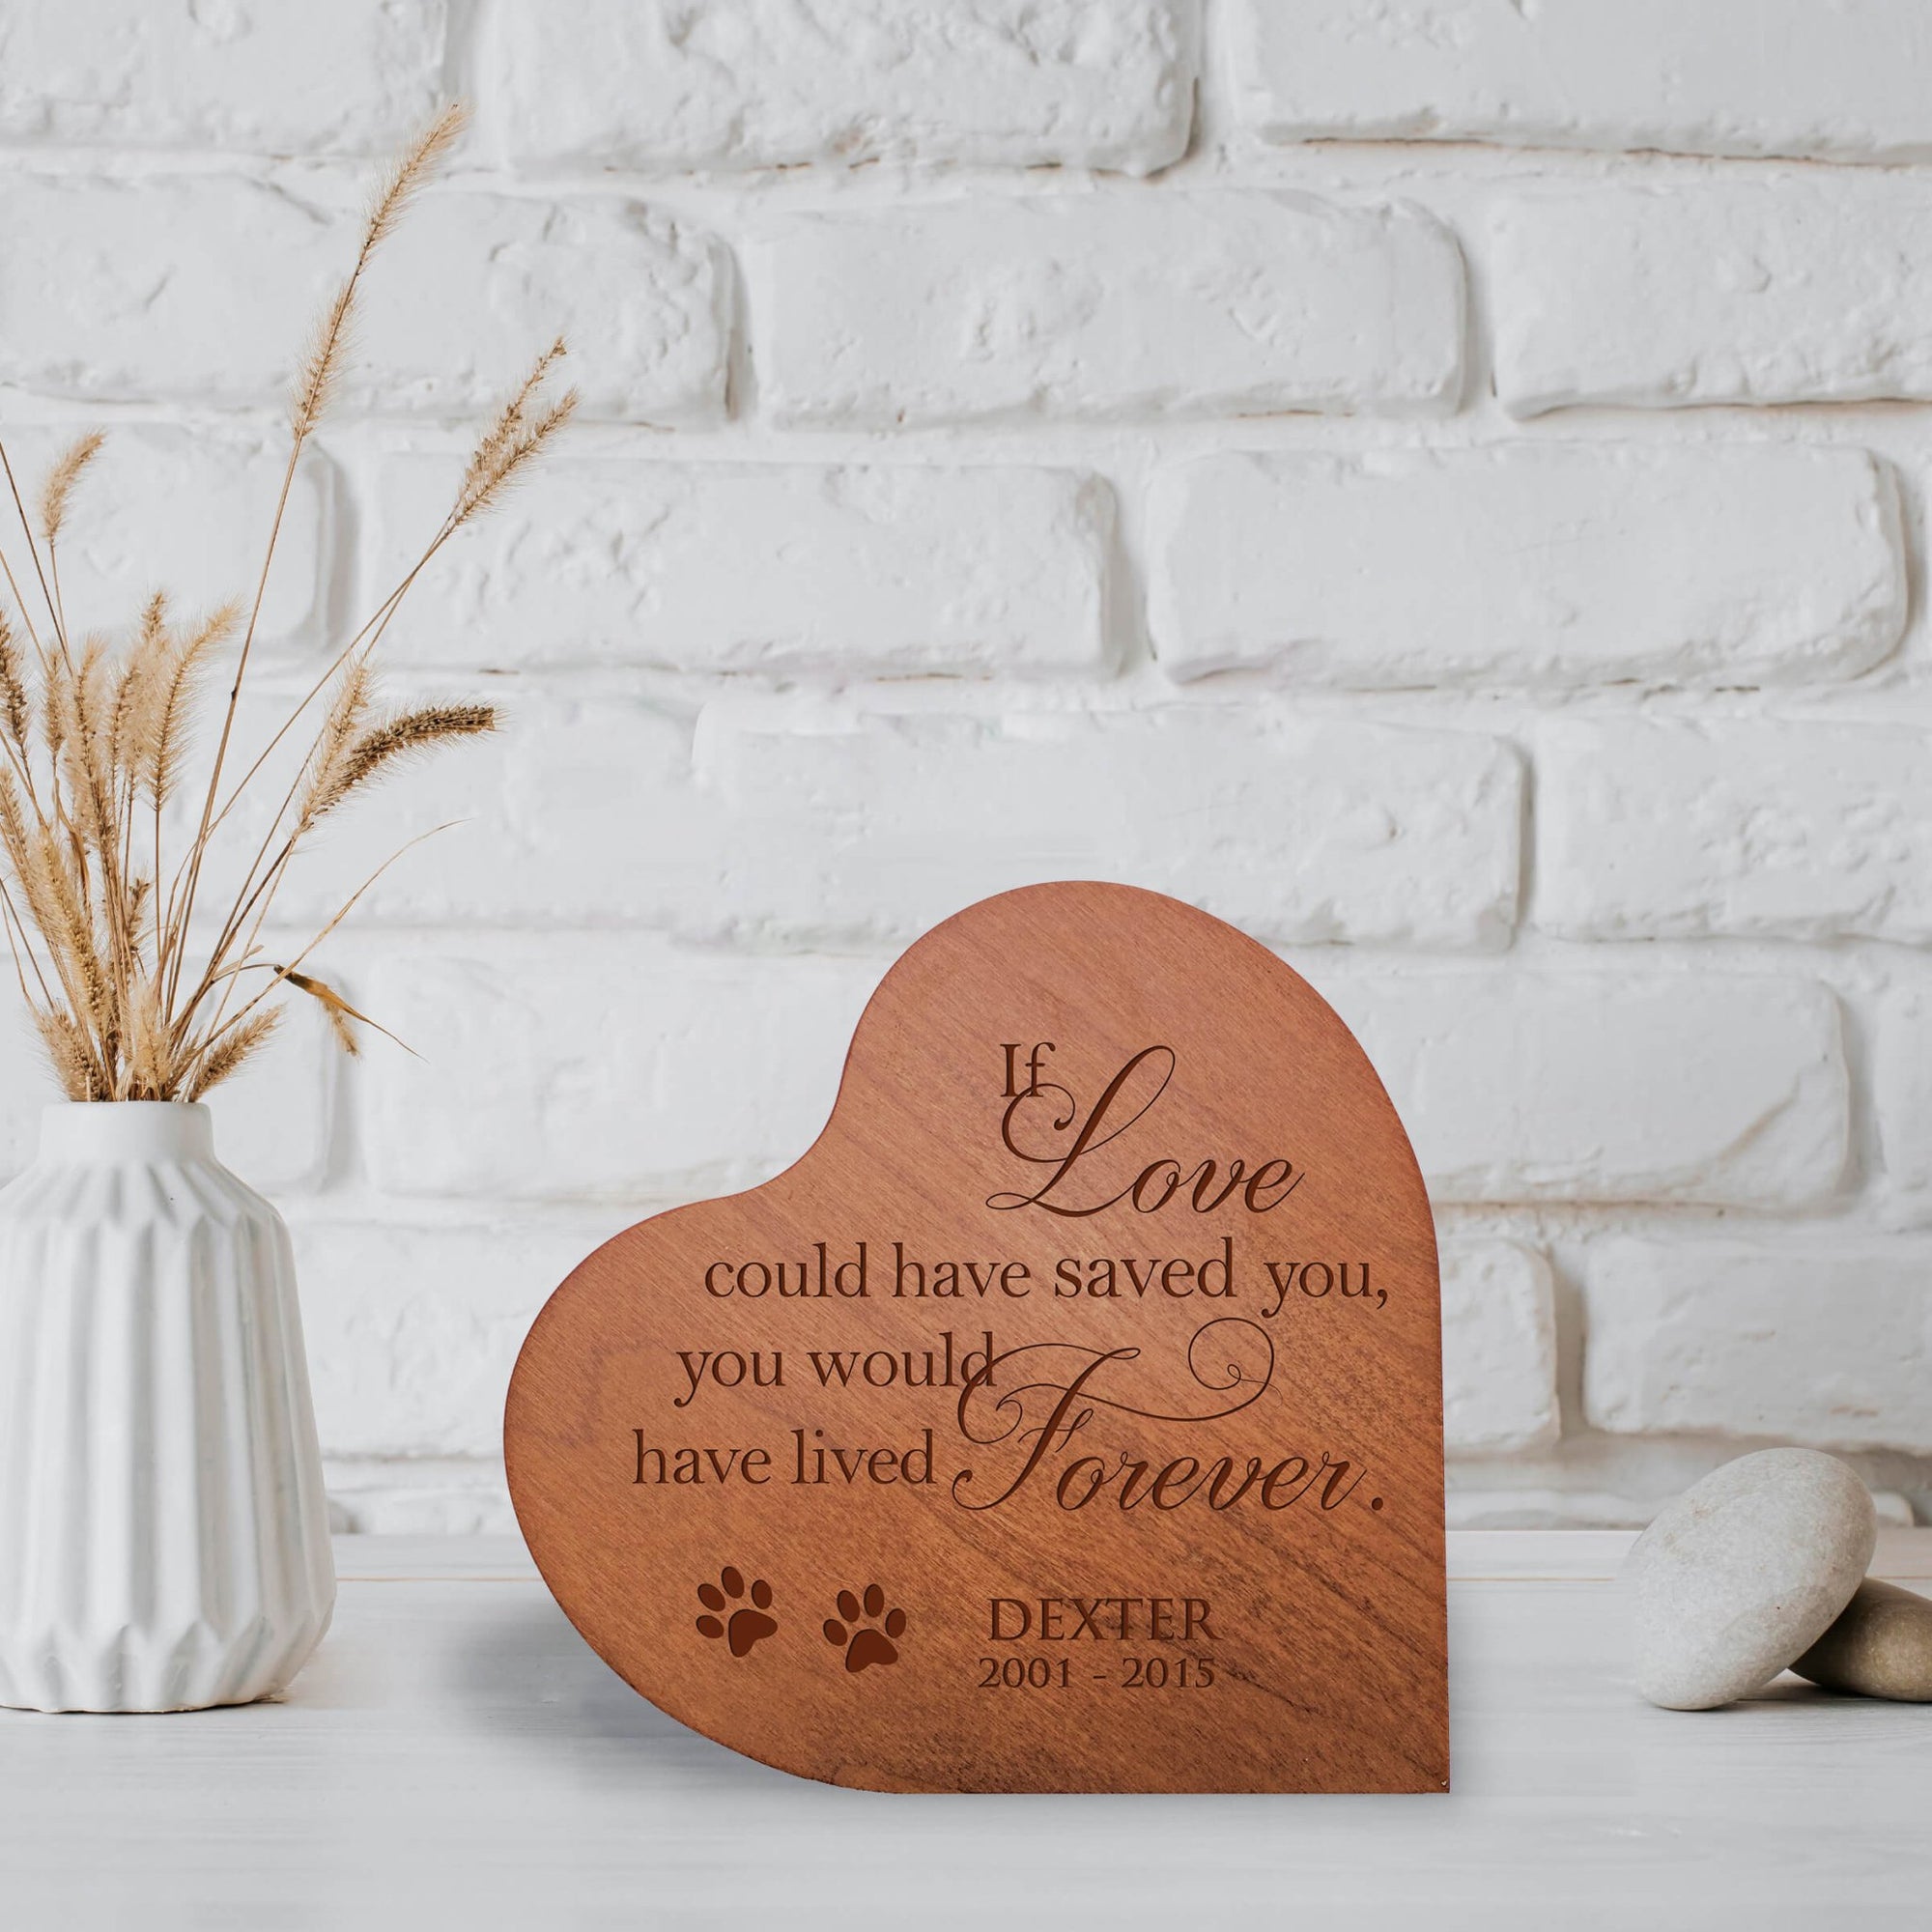 Personalized Small Heart Cremation Urn Keepsake For Pet Ashes - If Love Could Have Saved You - LifeSong Milestones